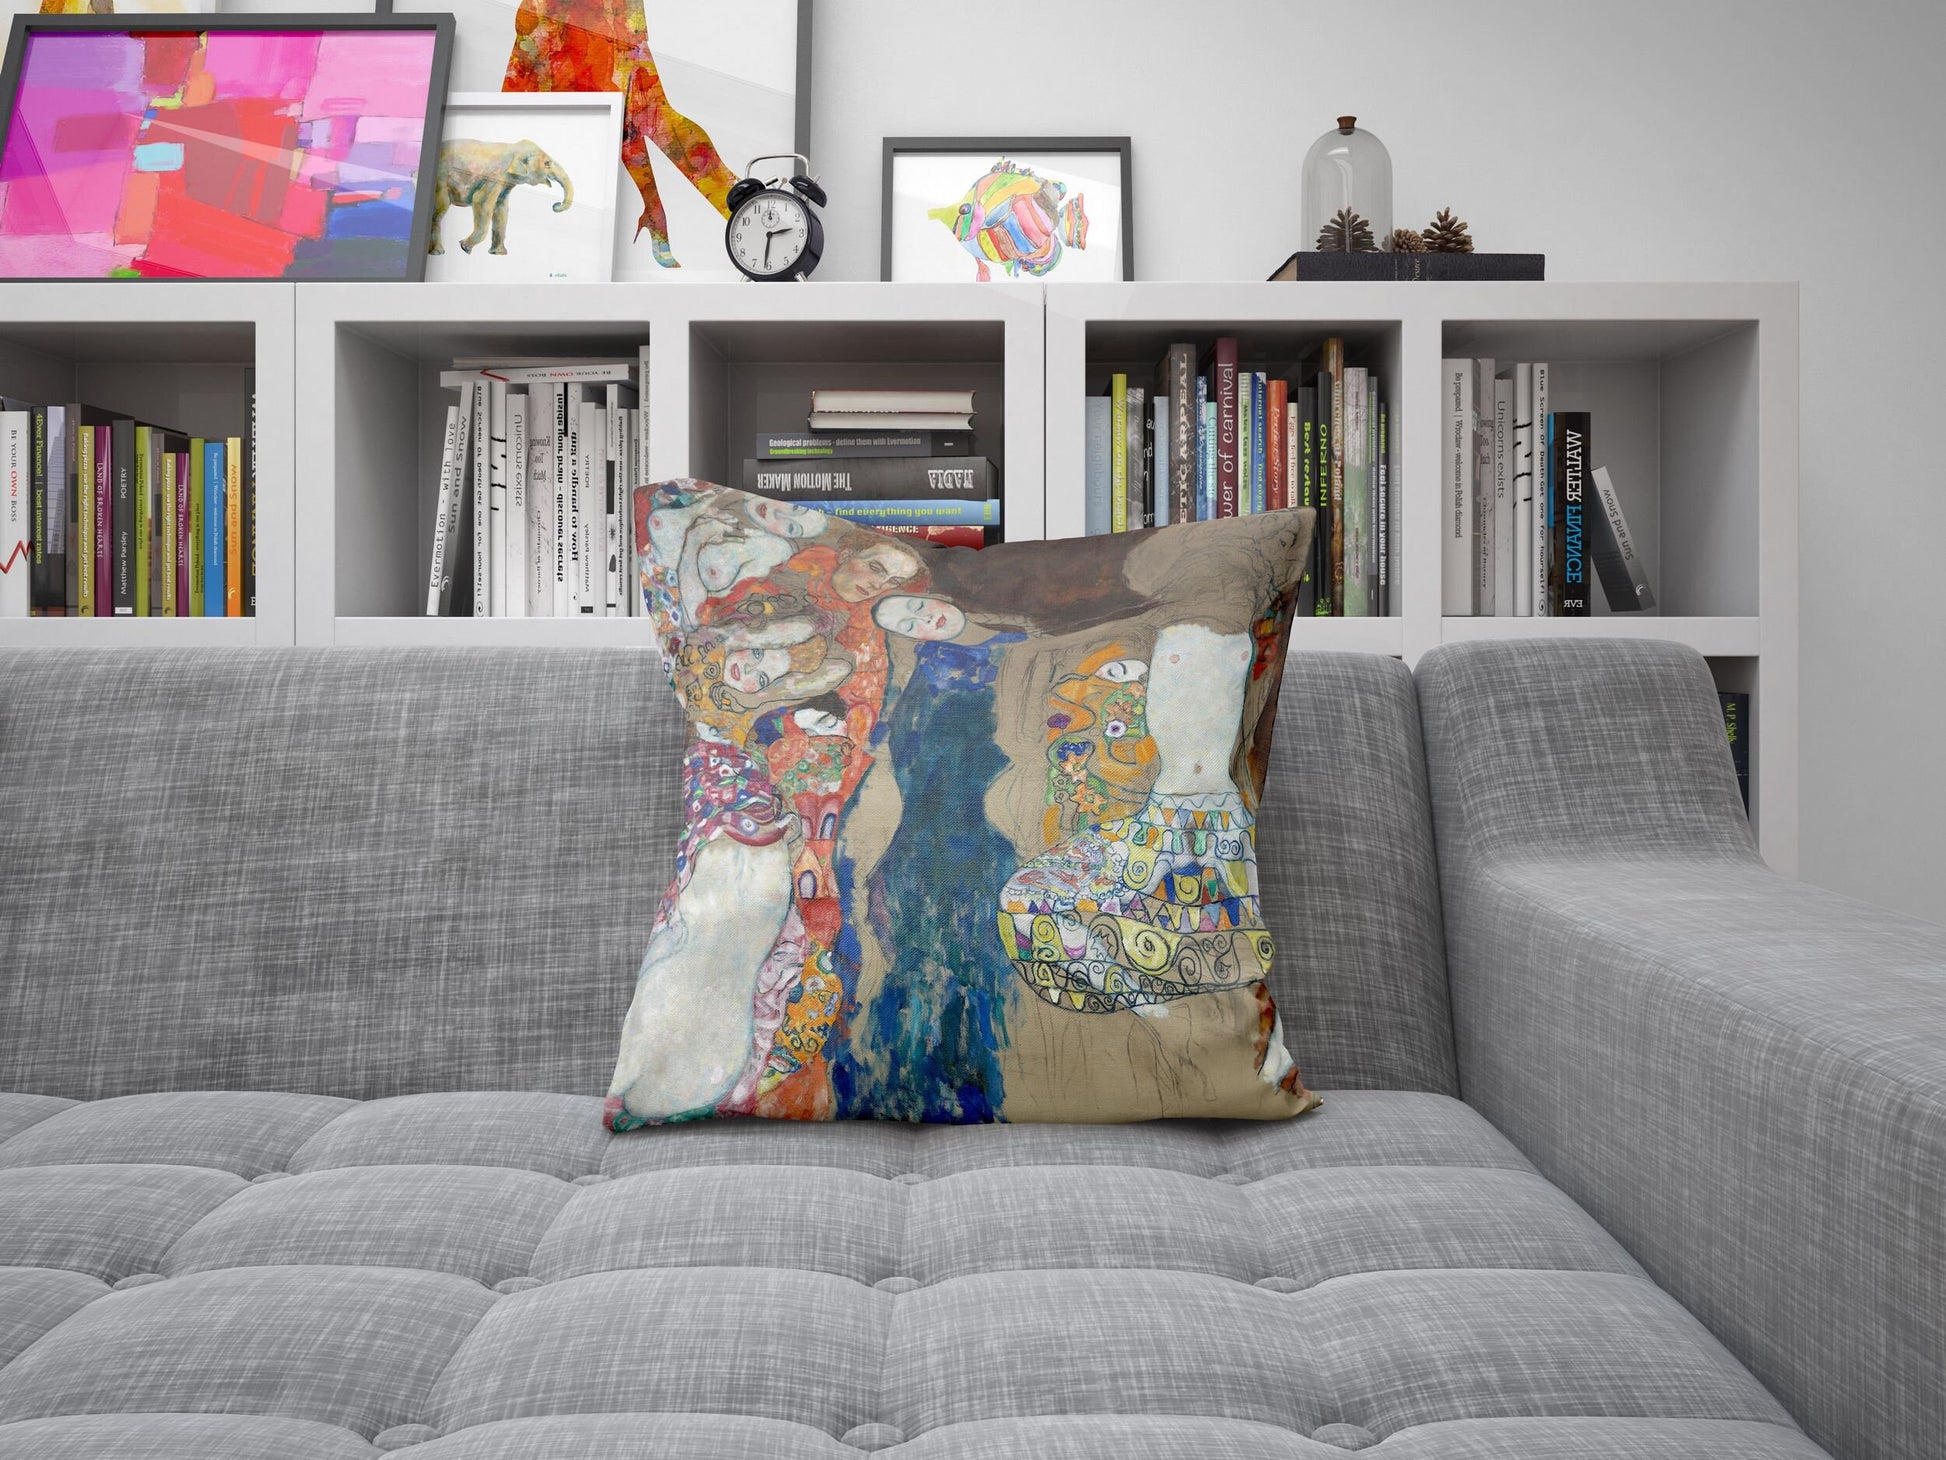 Gustave Klimt The Bride, Throw Pillow, Abstract Throw Pillow, Soft Pillow Cases, Colorful Pillow Case, Contemporary Pillow, Square Pillow